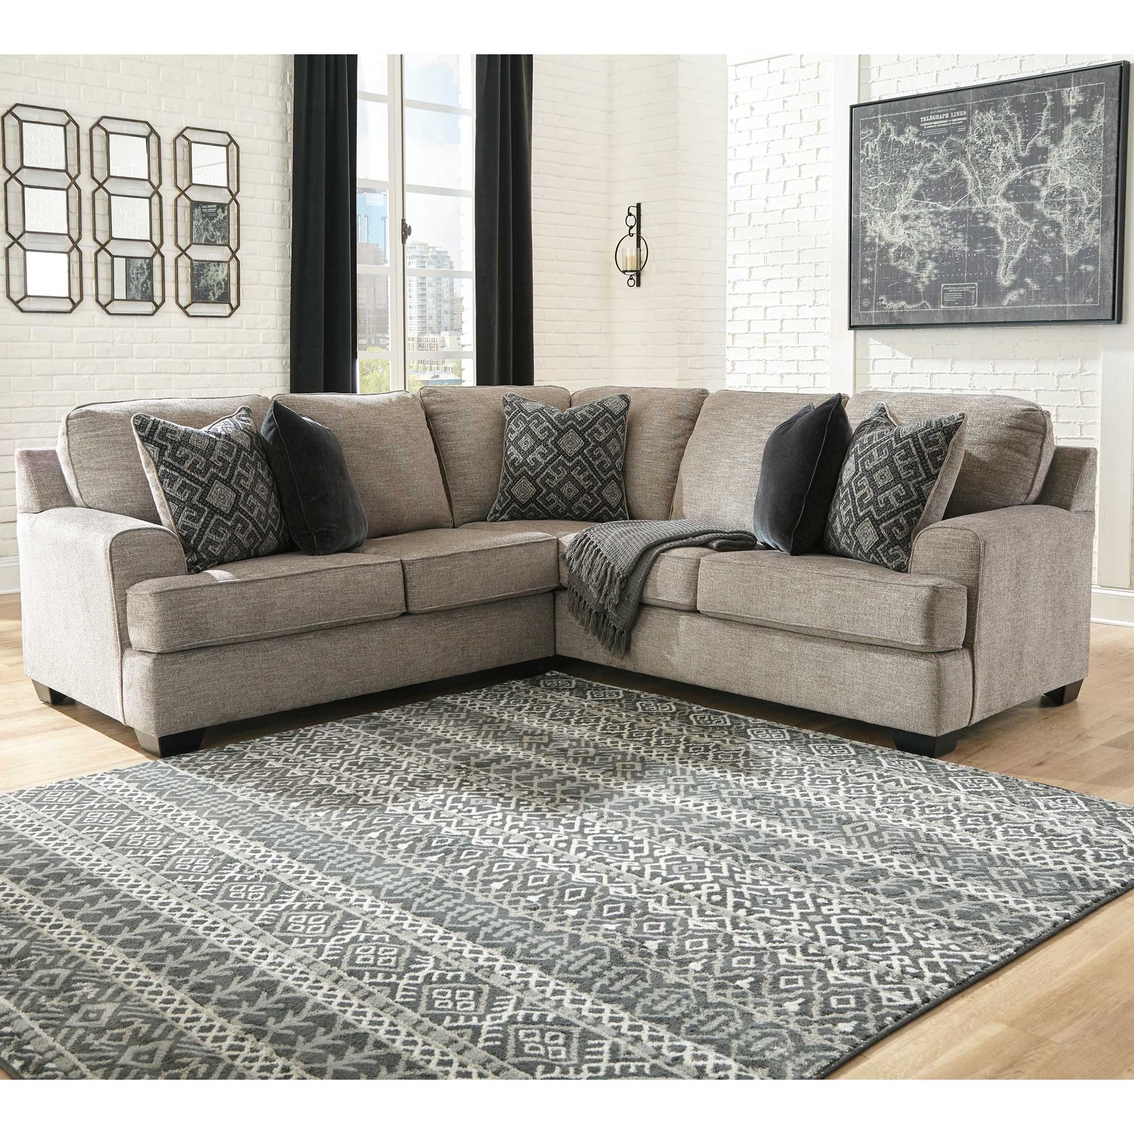 Signature Design by Ashley Bovarian RAF Sofa / LAF Loveseat 2 pc. Sectional - Image 2 of 2